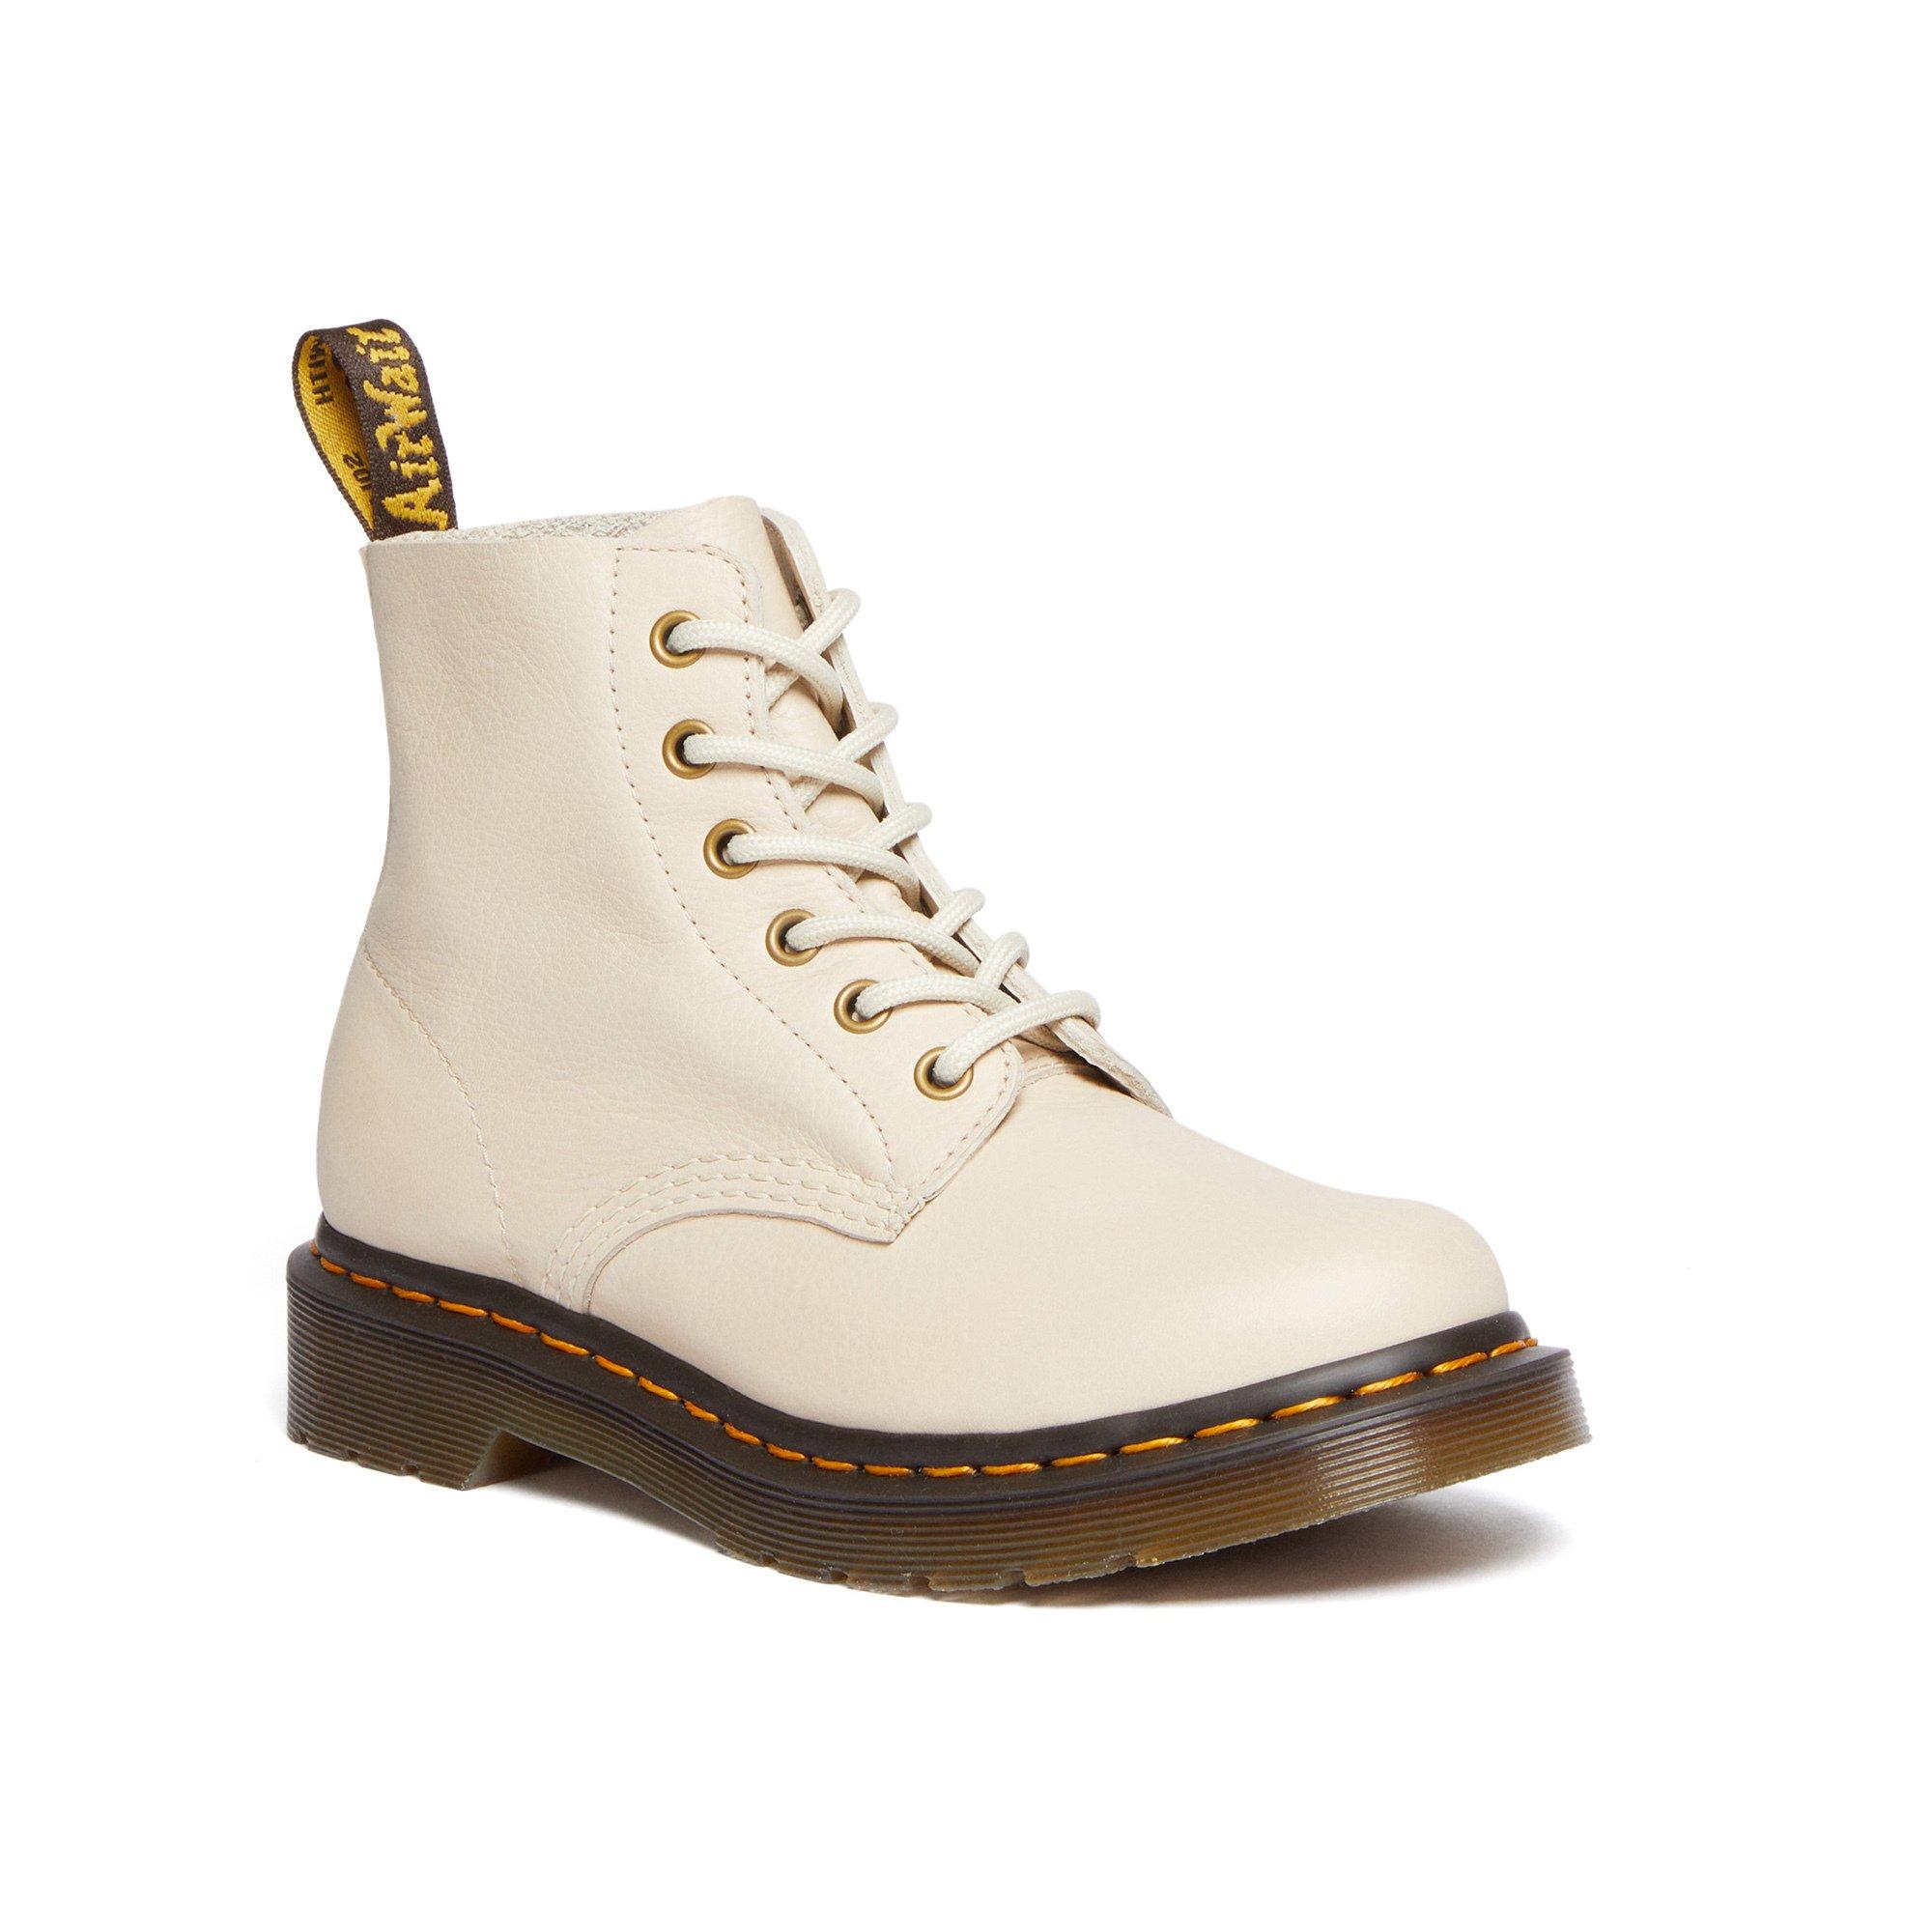 Image of Dr.Martens 101 PASCAL 6 EYE BOOT Schnürstiefel - 36